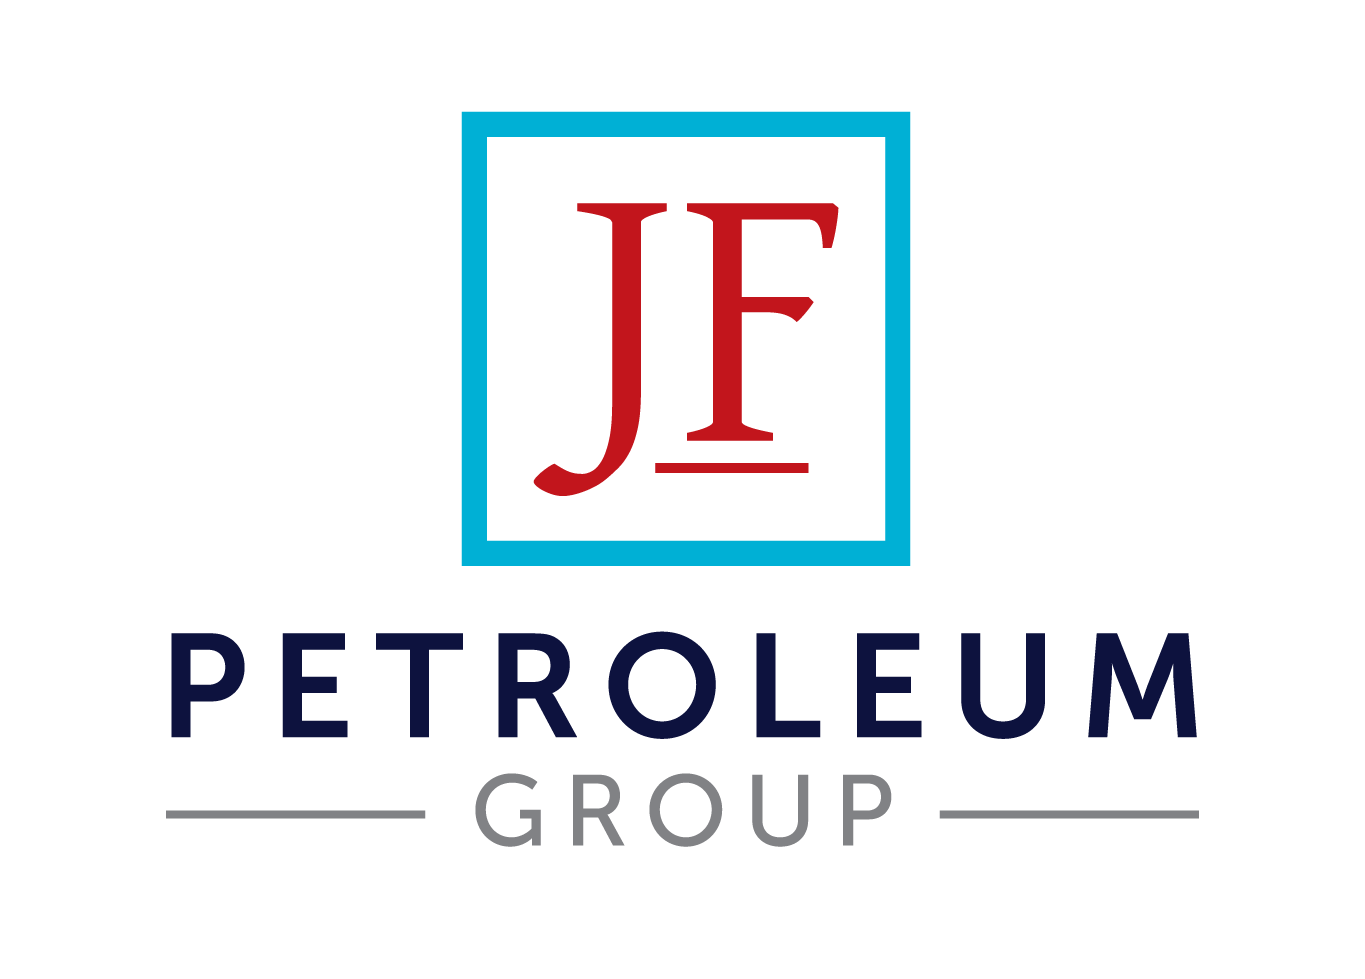 MidOcean Partners Announces that The JF Petroleum Group Enters into a Definitive Agreement to Acquire the Assets of JHS Construction